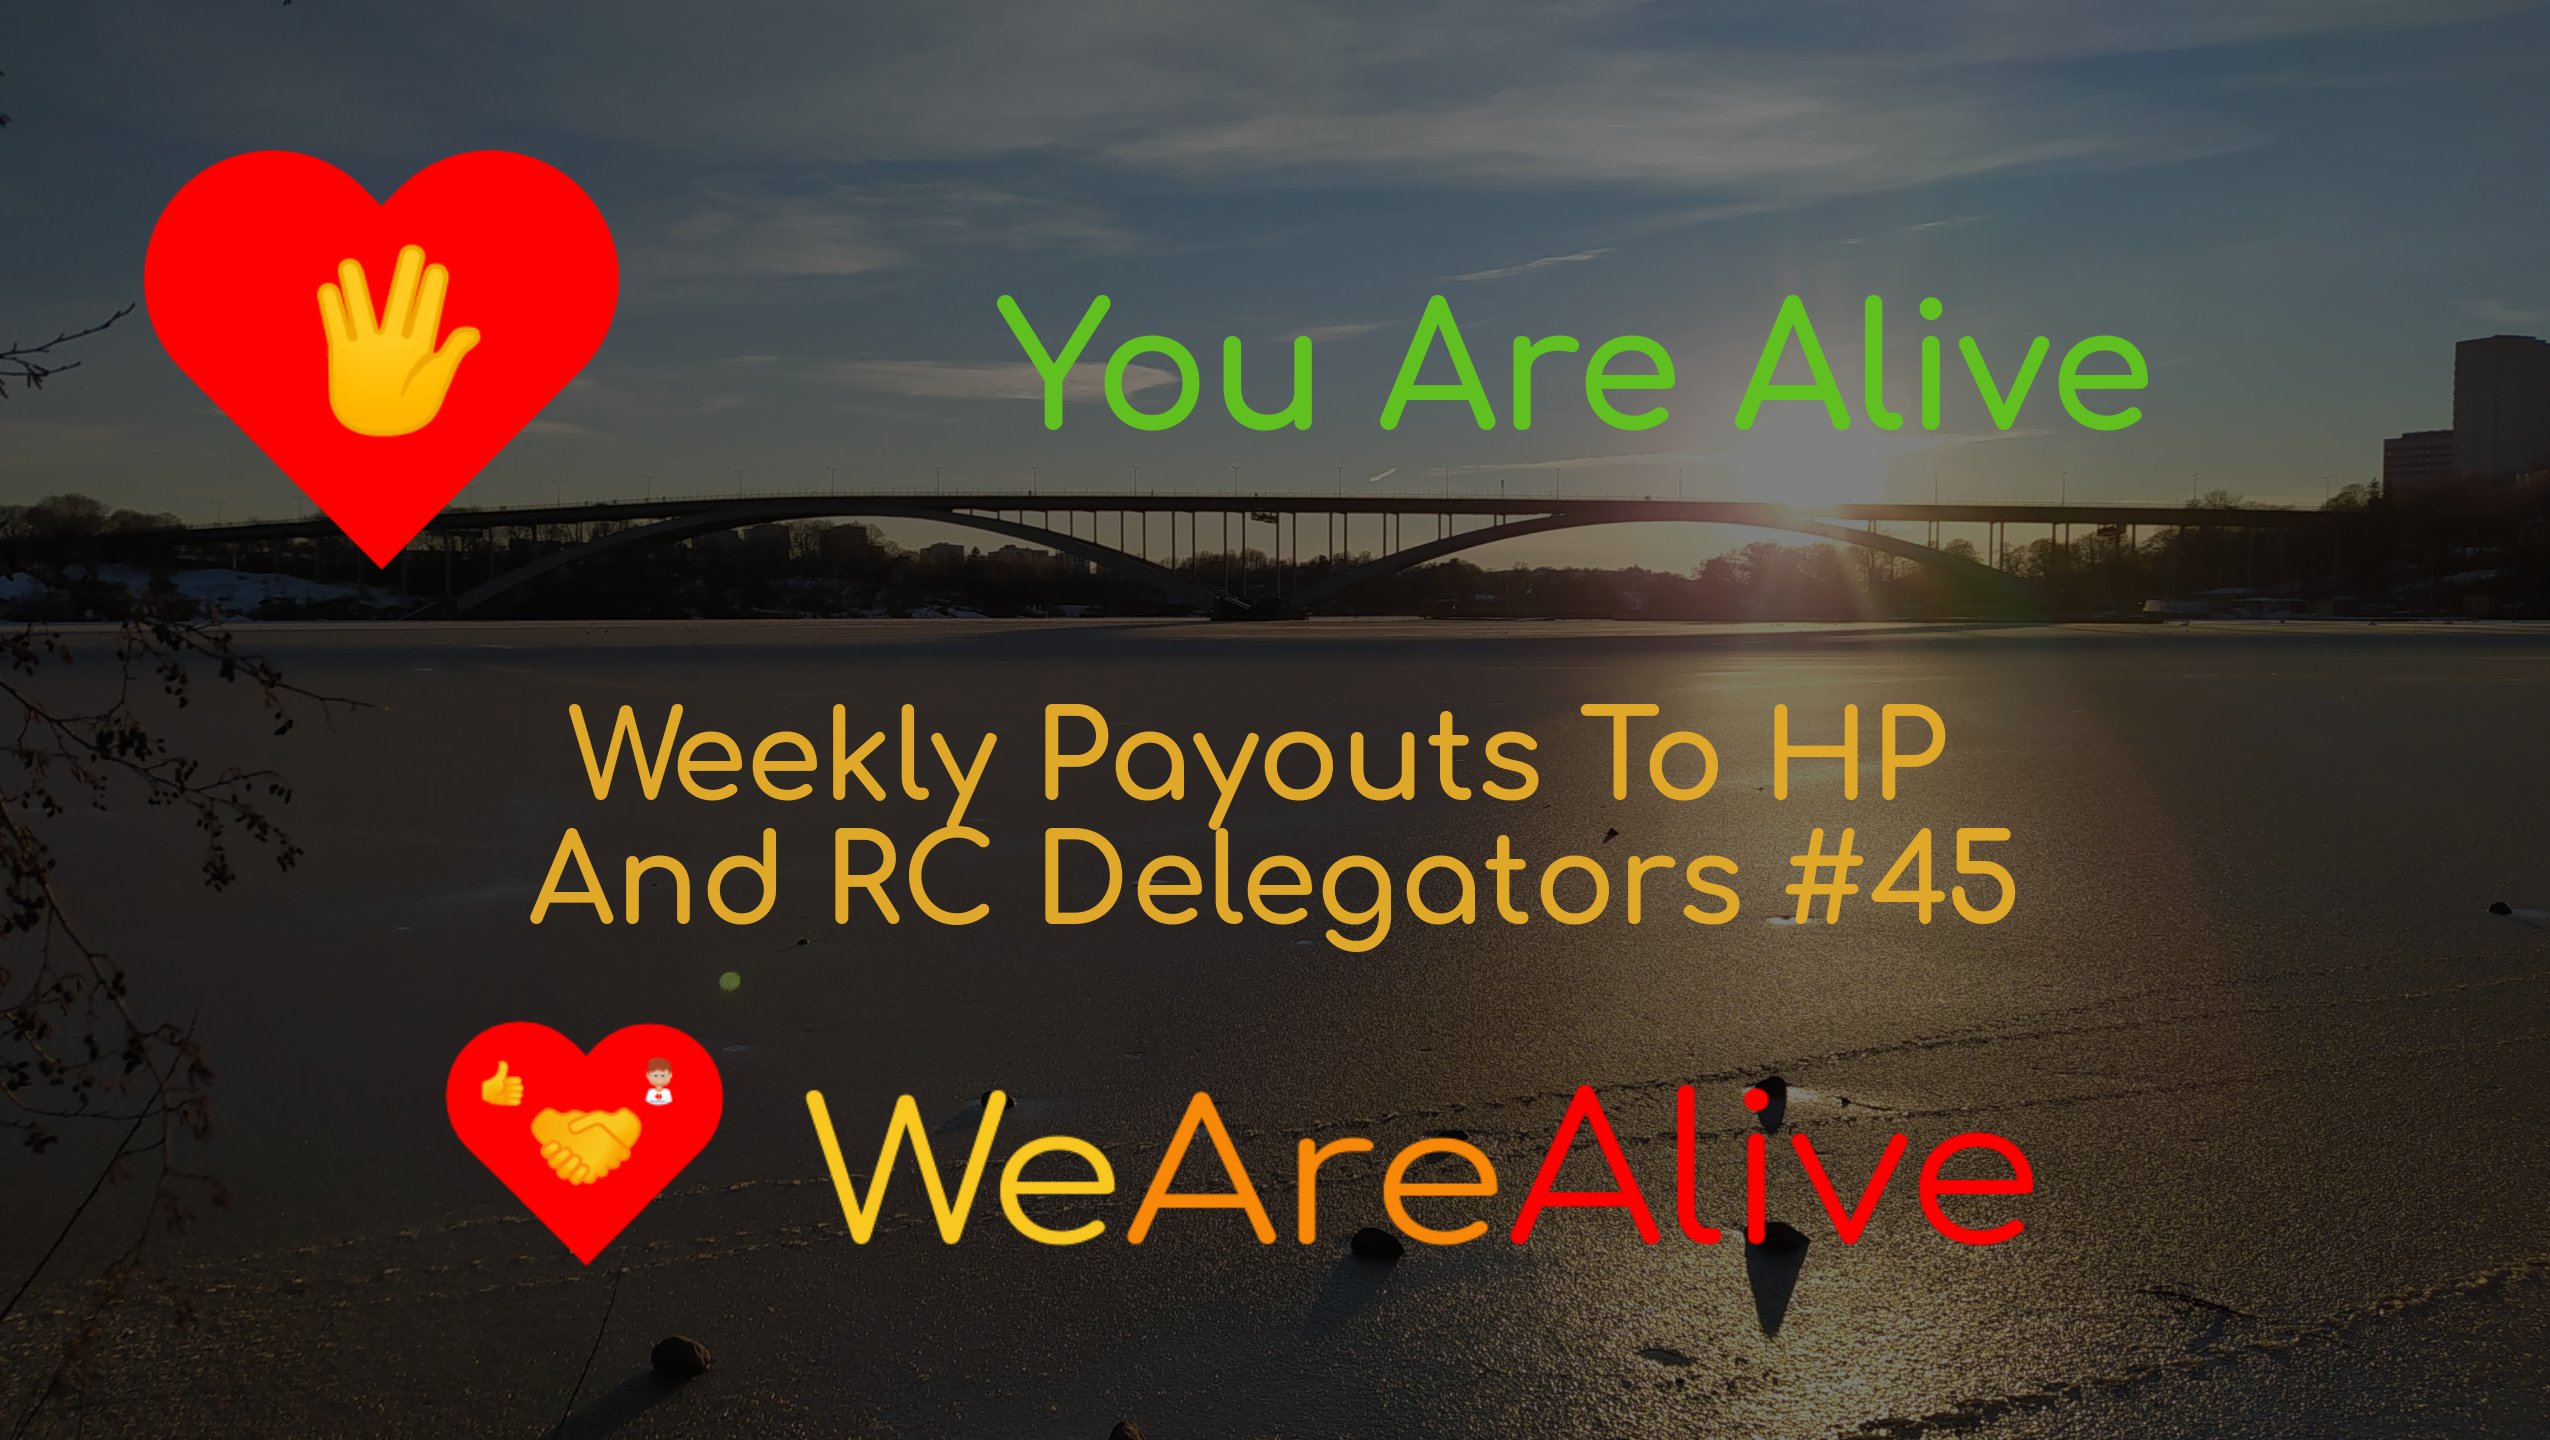 @youarealive/you-are-alive-weekly-payouts-to-hp-and-rc-delegators-45